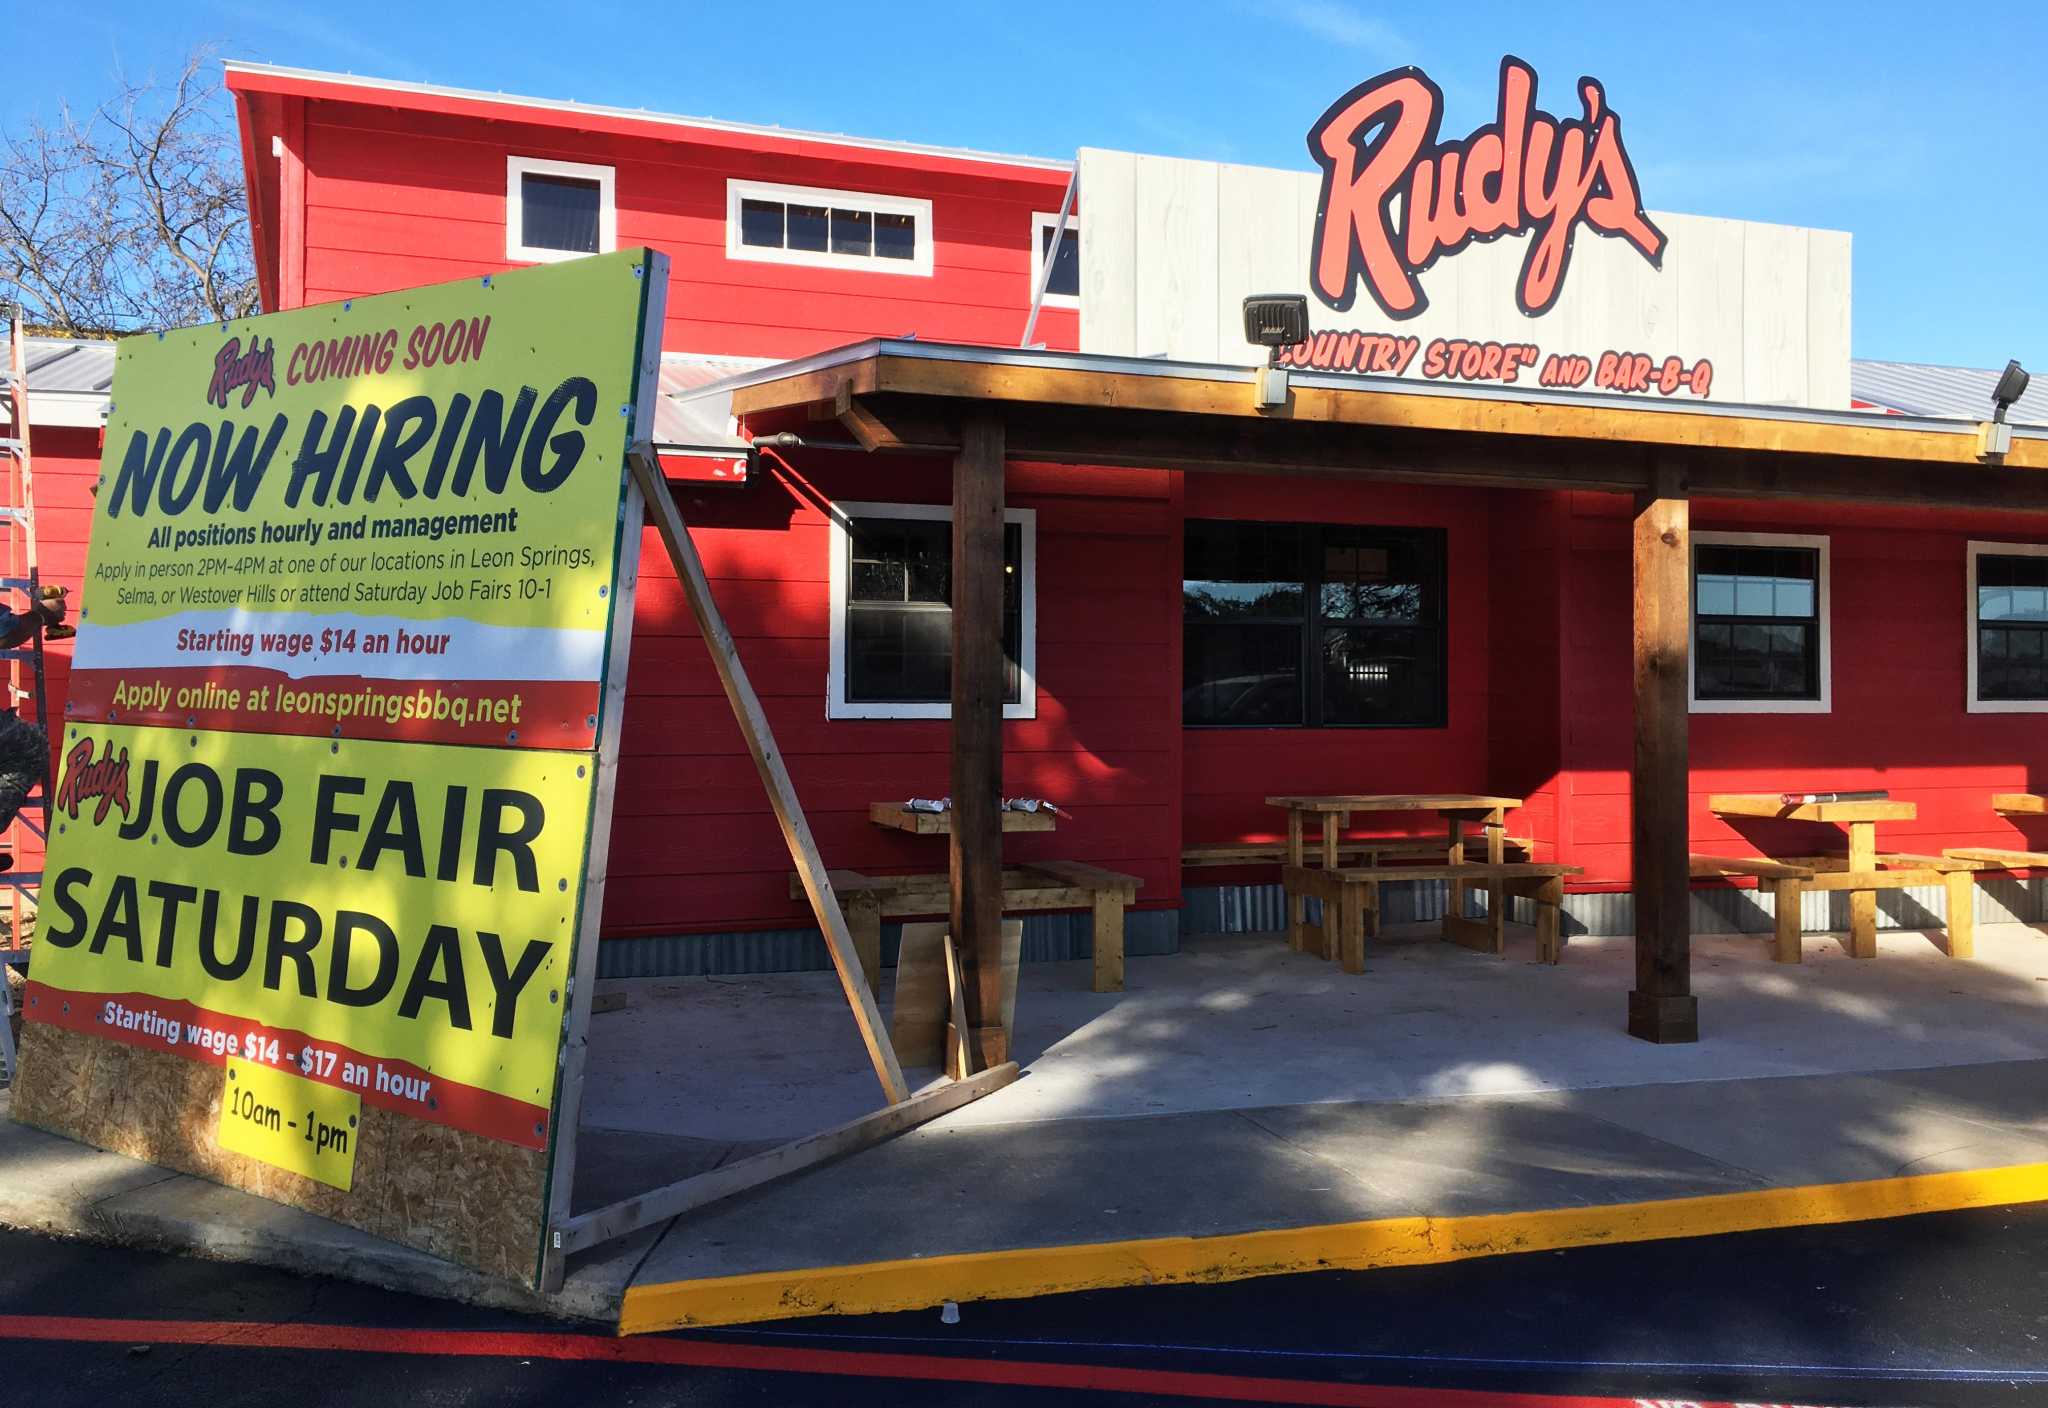 Now open: Rudy's Country Store and Bar-B-Q barbecue restaurant near San